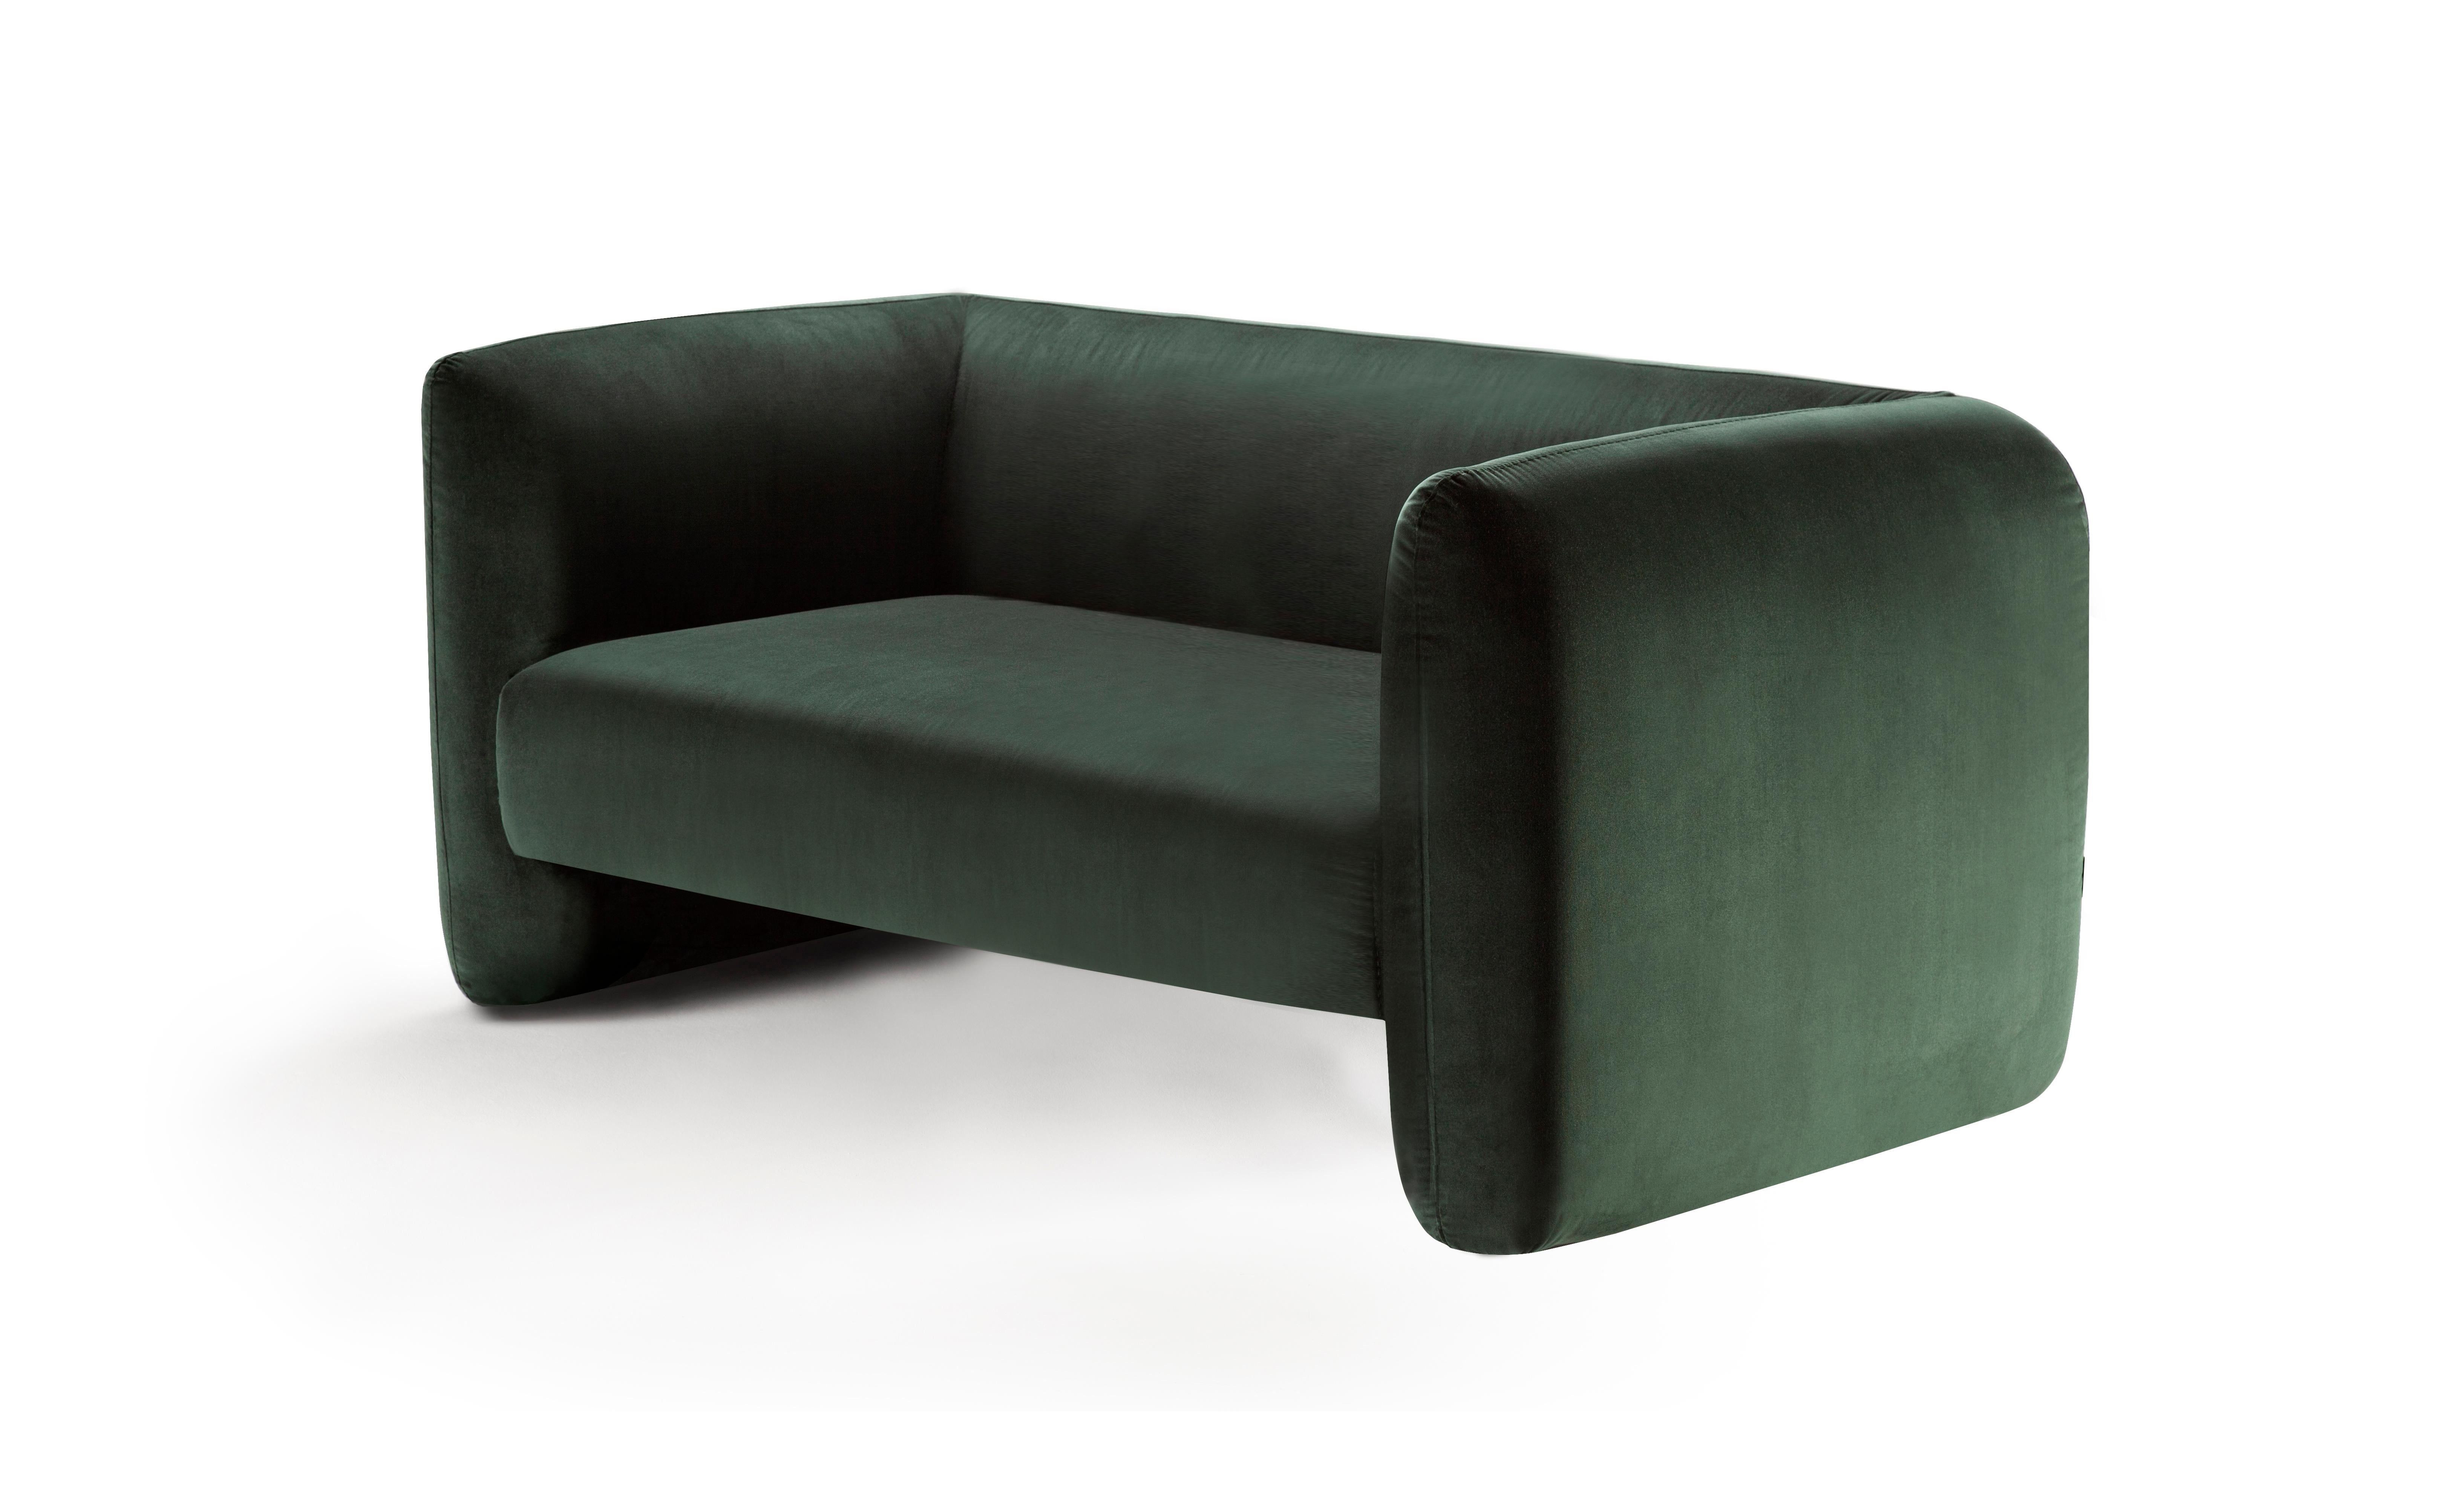 Contemporary Modern Jacob Sofa in Green Velvet Fabric by Collector Studio

This fun and sophisticated 21st century sofa designed by Collector Studio, it’s simple shape and attractive color game along with other possible combinations of materials